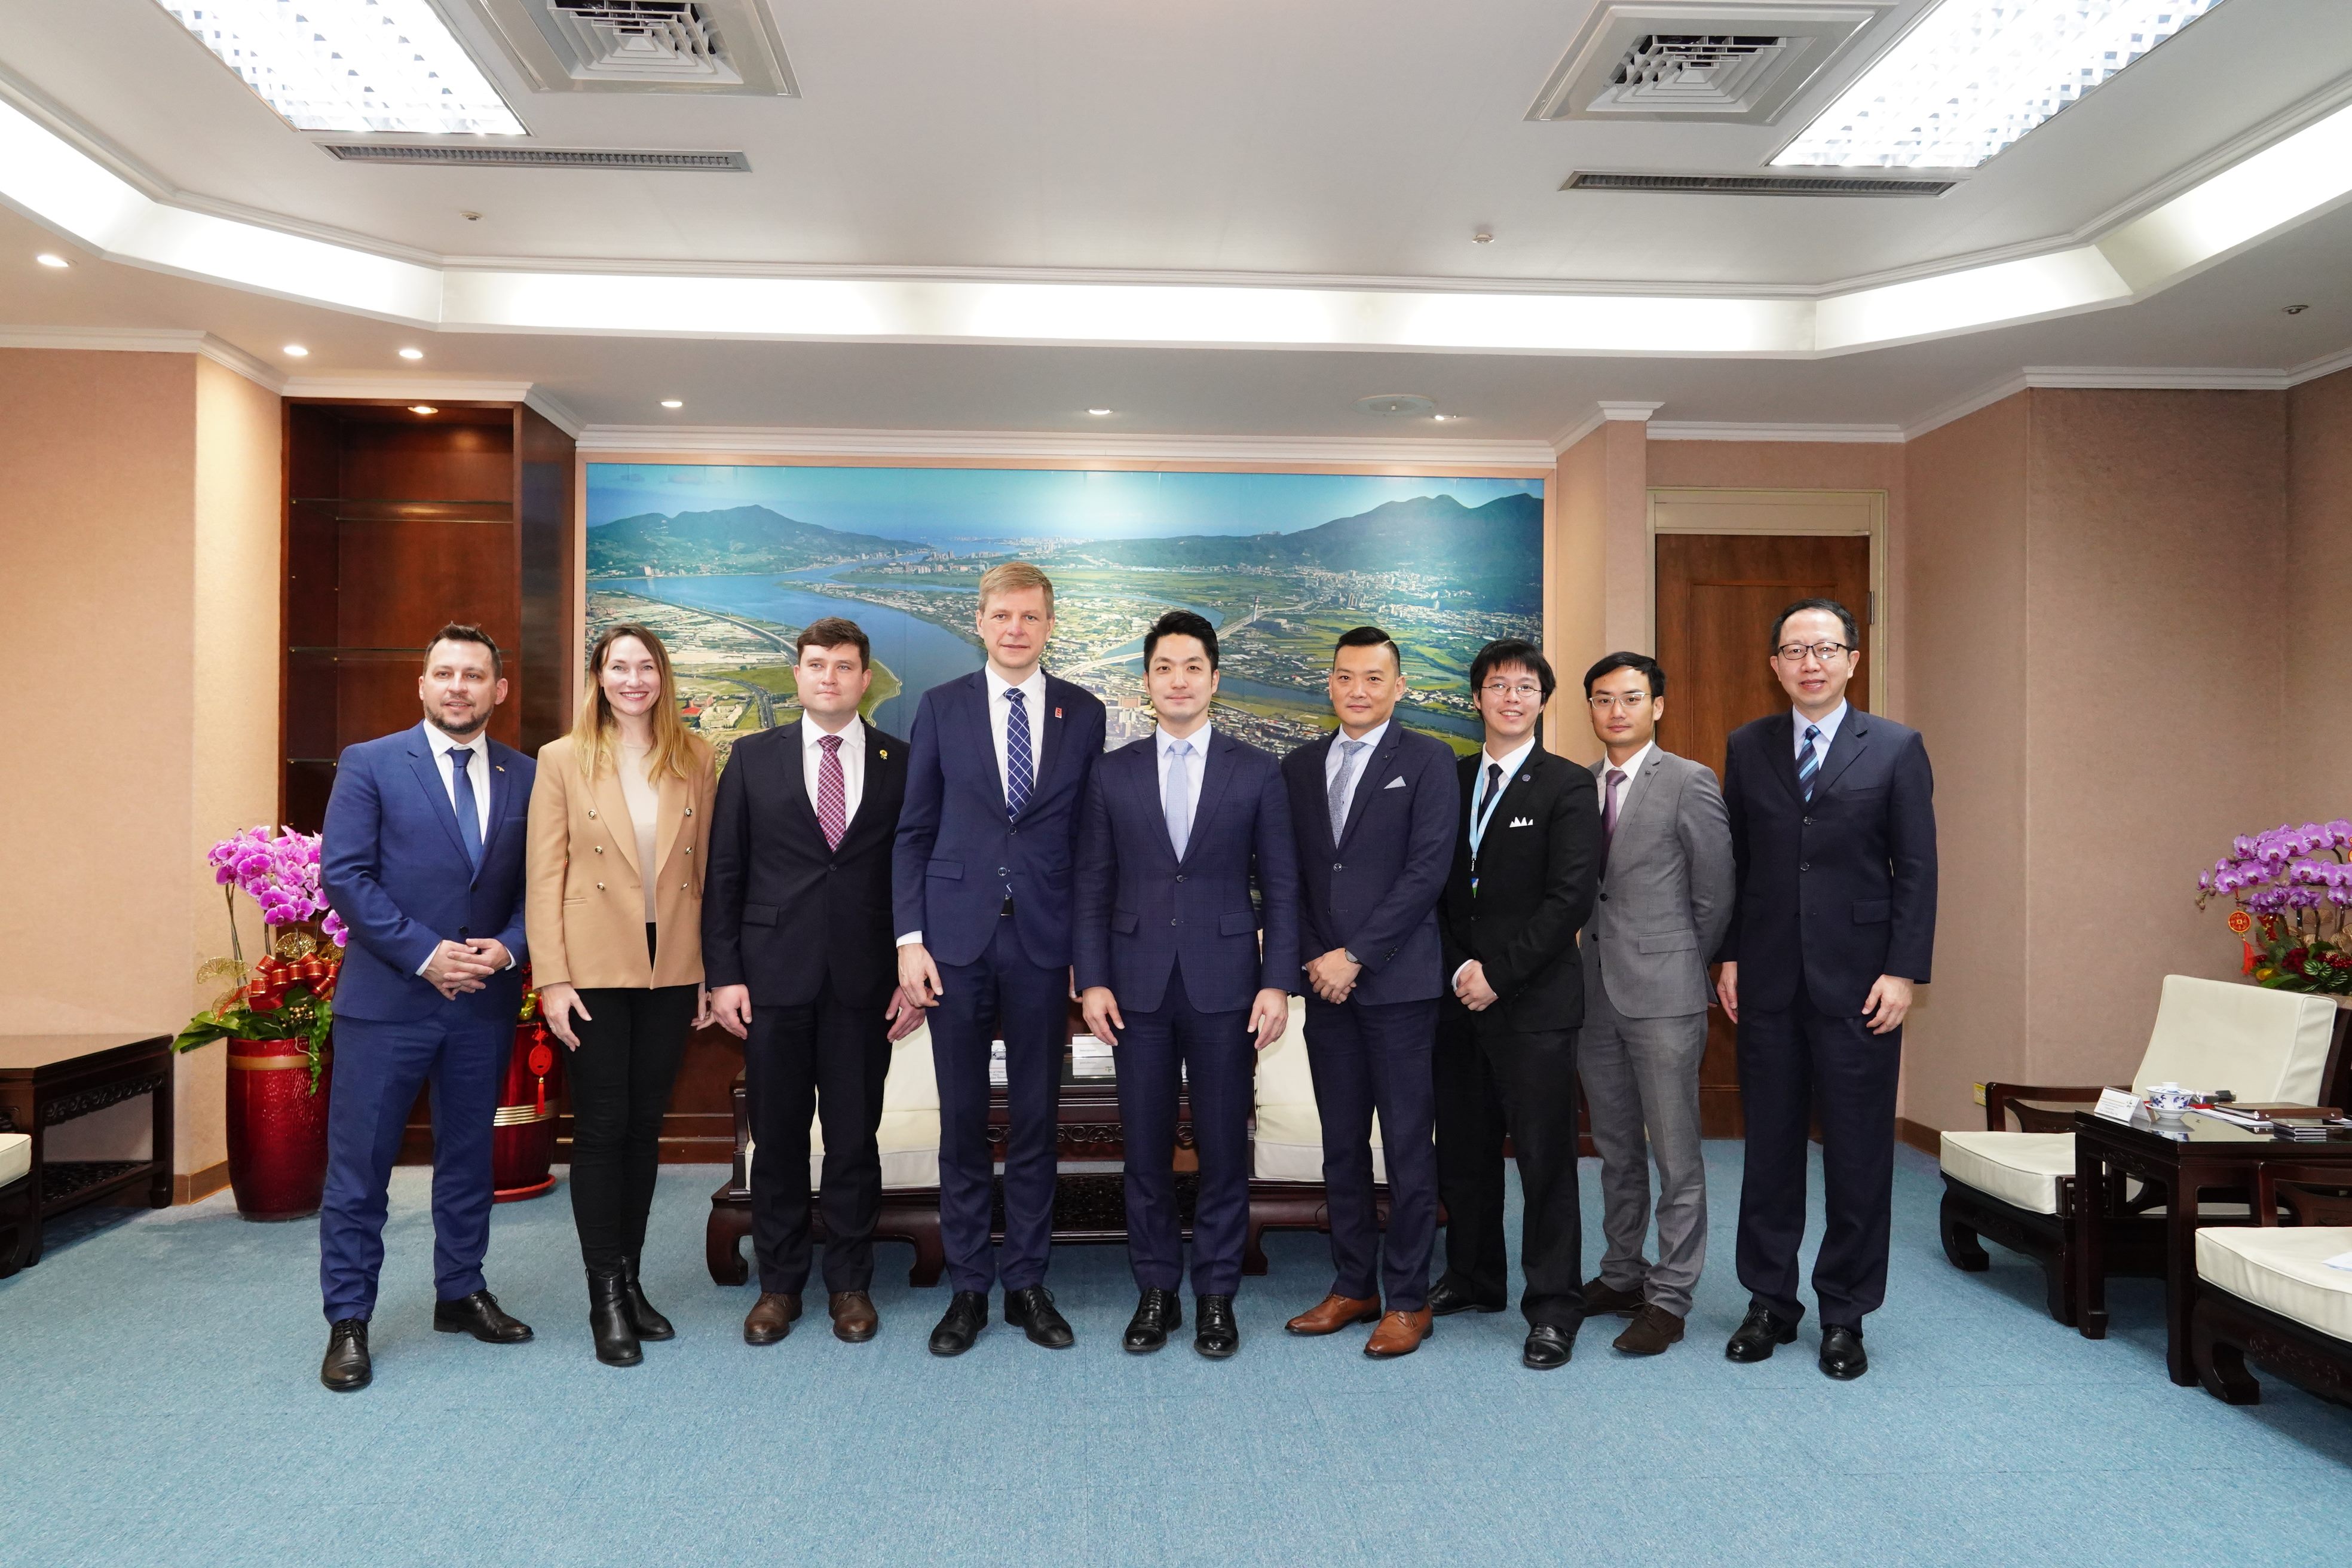  Mayor Chiang Wan-An Receives Delegation from Vilnius, the Capital of Lithuania